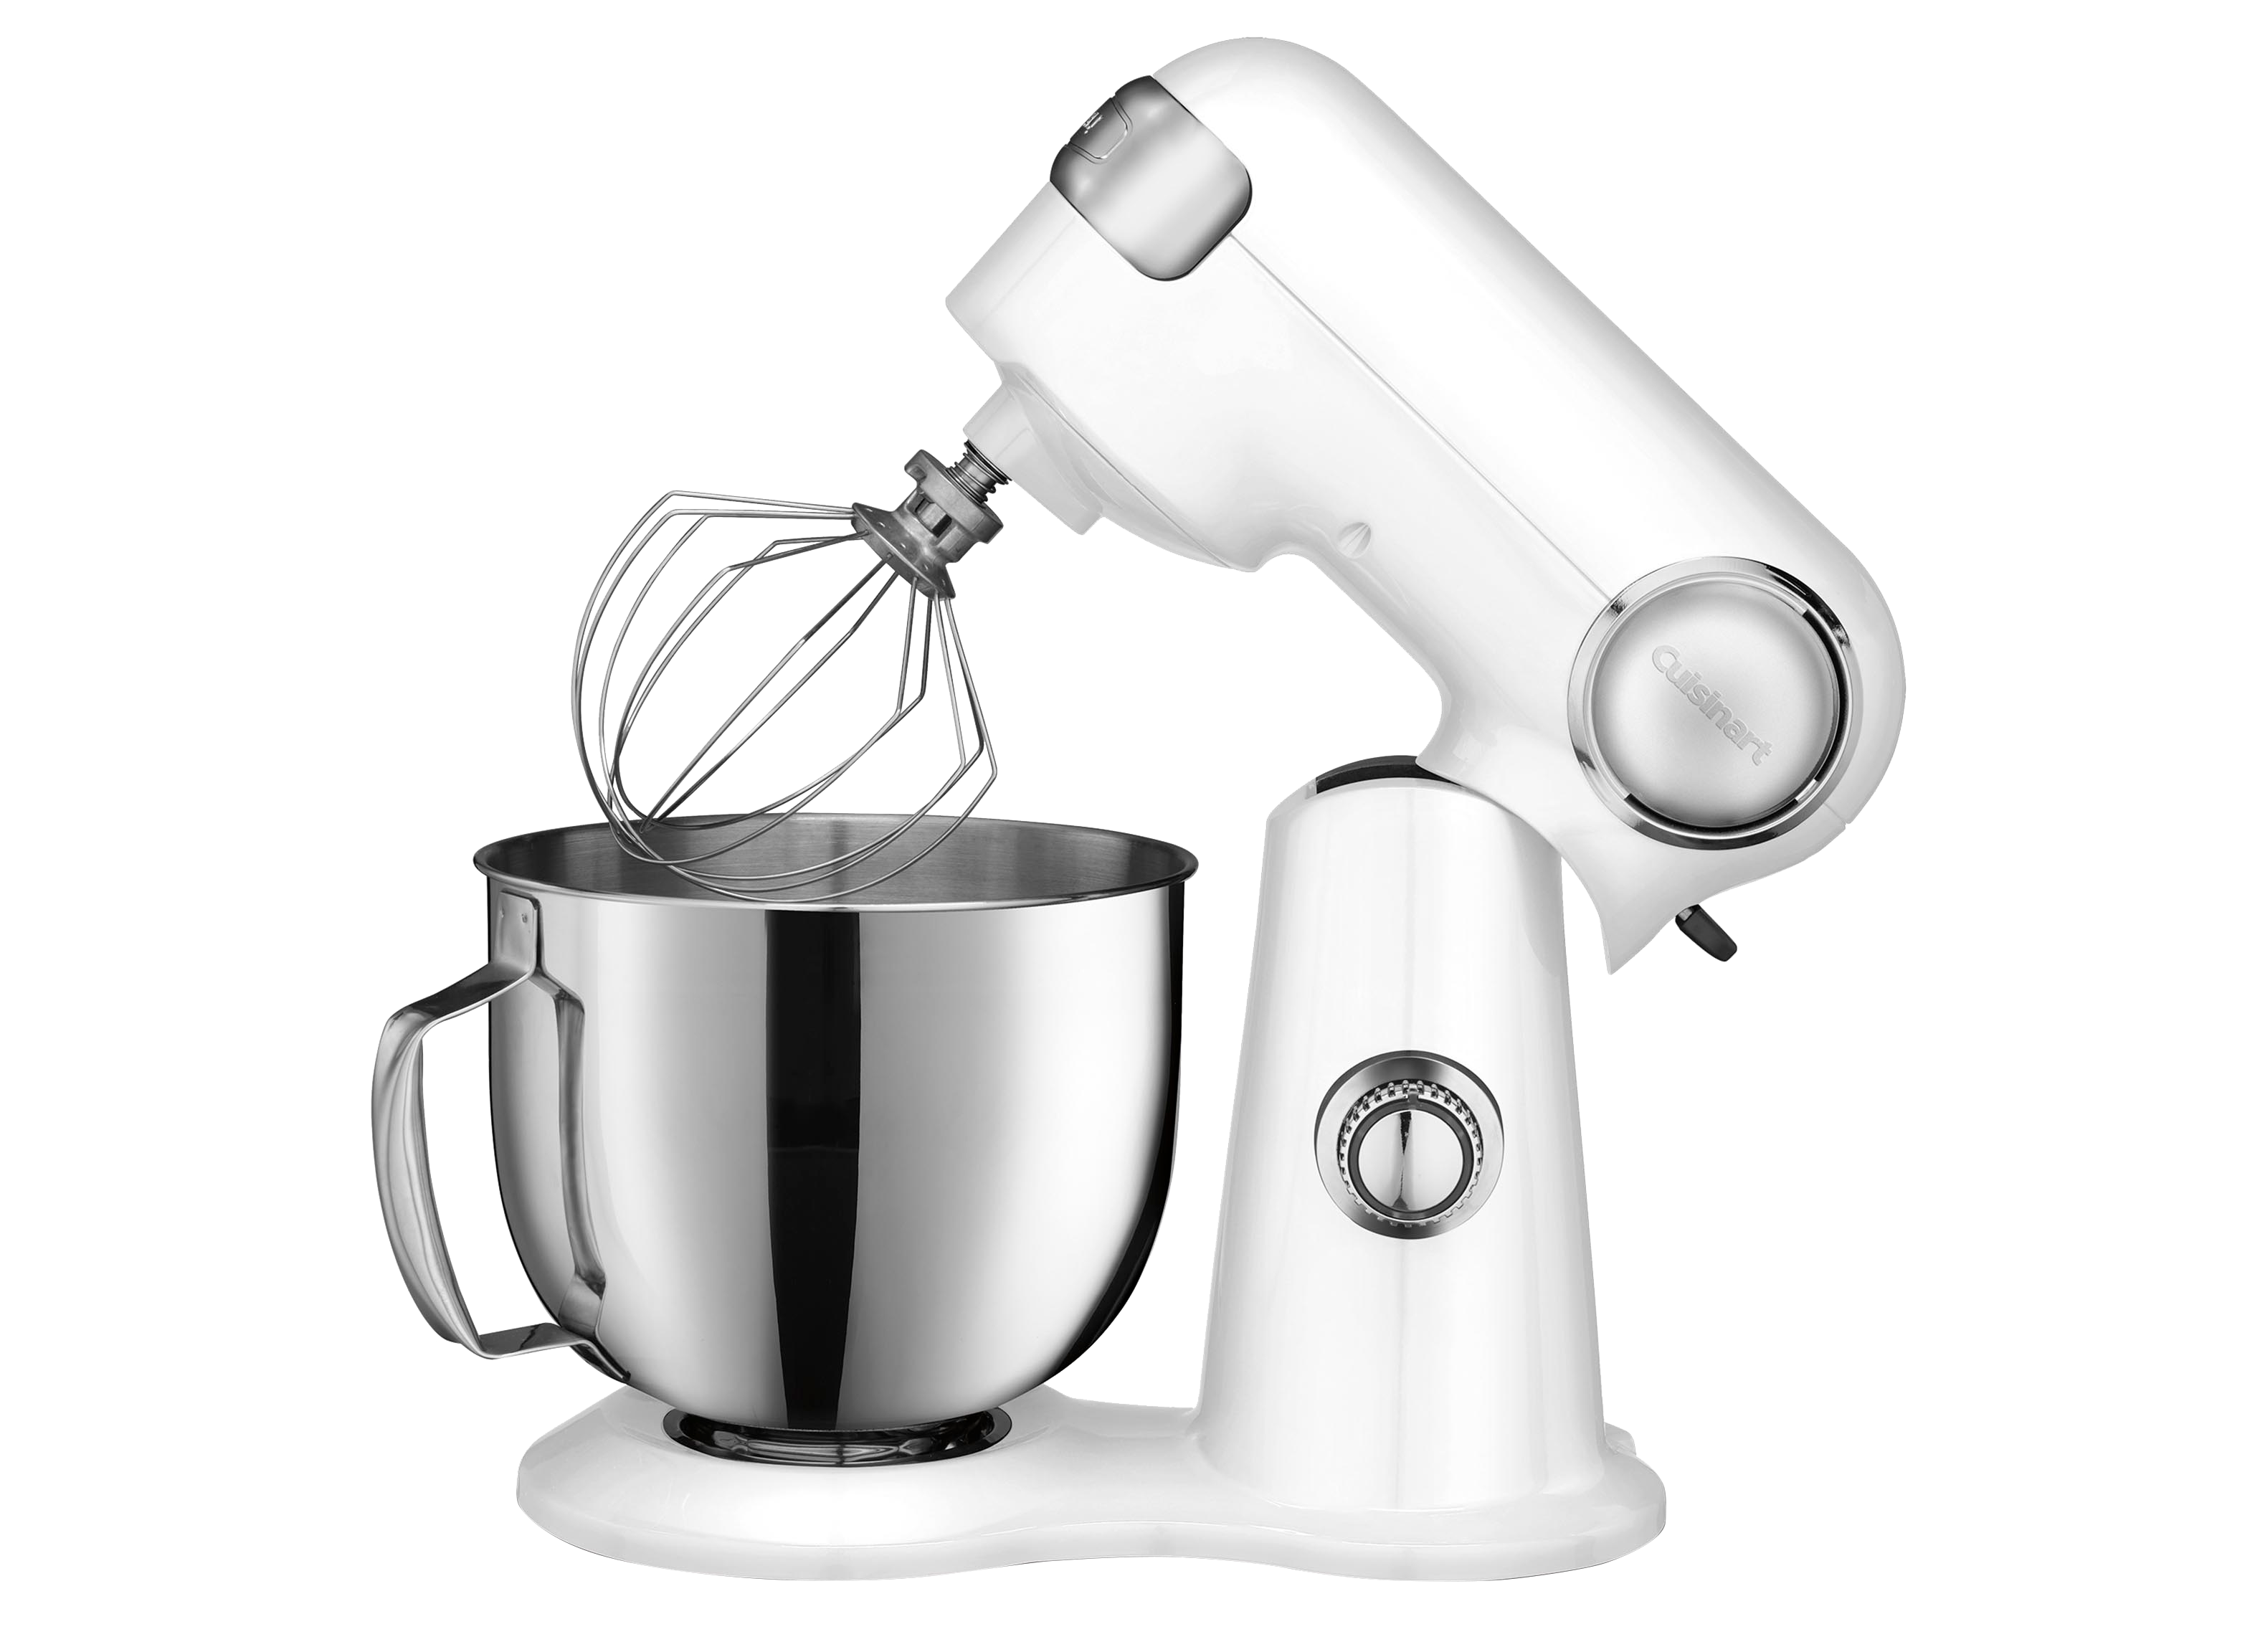 https://crdms.images.consumerreports.org/prod/products/cr/models/399797-stand-mixers-cuisinart-precision-master-sm-50-10009453.png